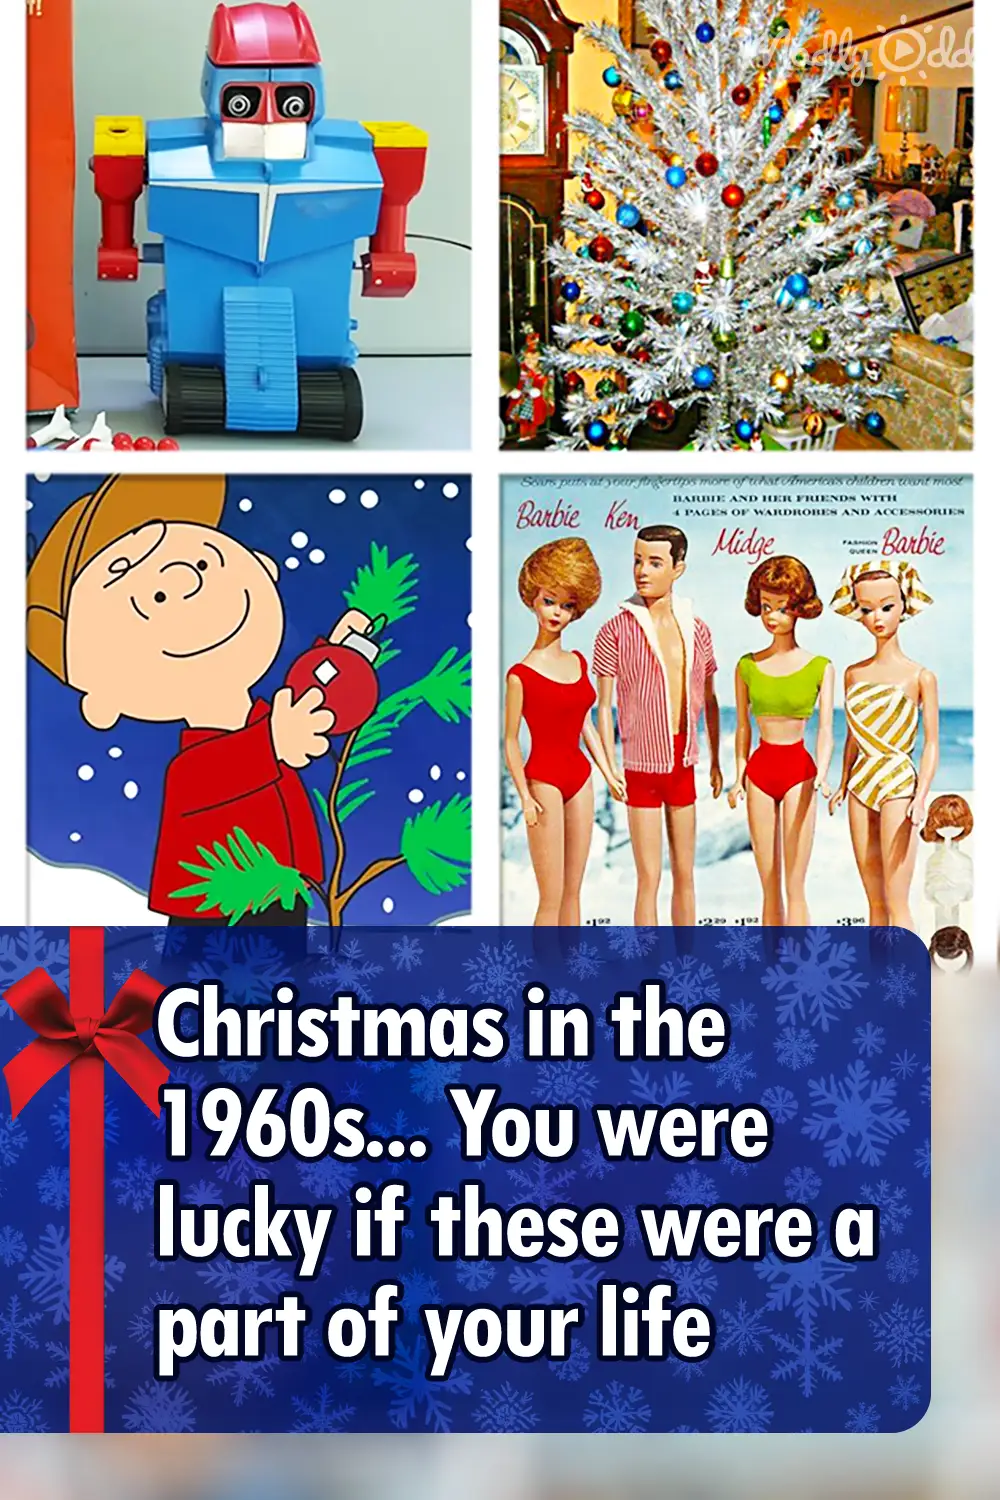 Christmas in the 1960s... You were lucky if these were a part of your life